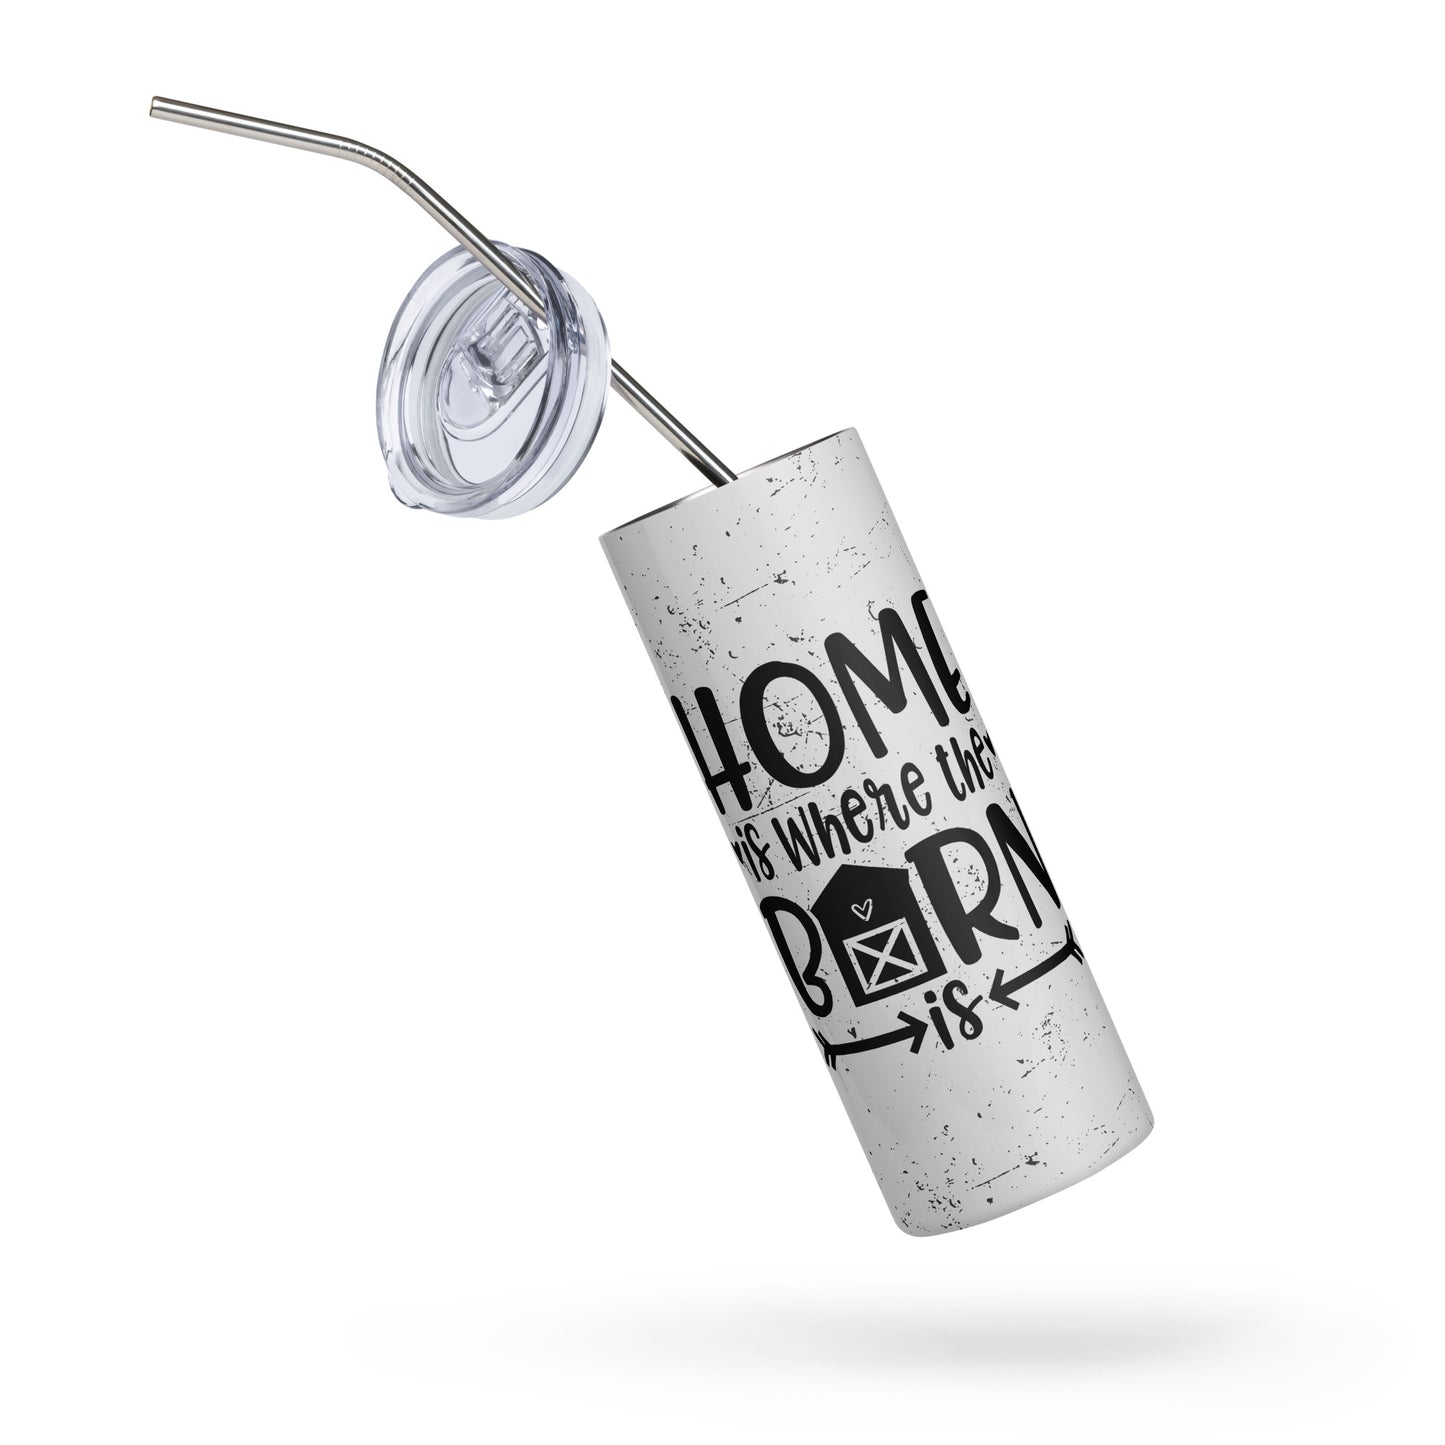 Homes is Where the Barn is - Stainless steel tumbler